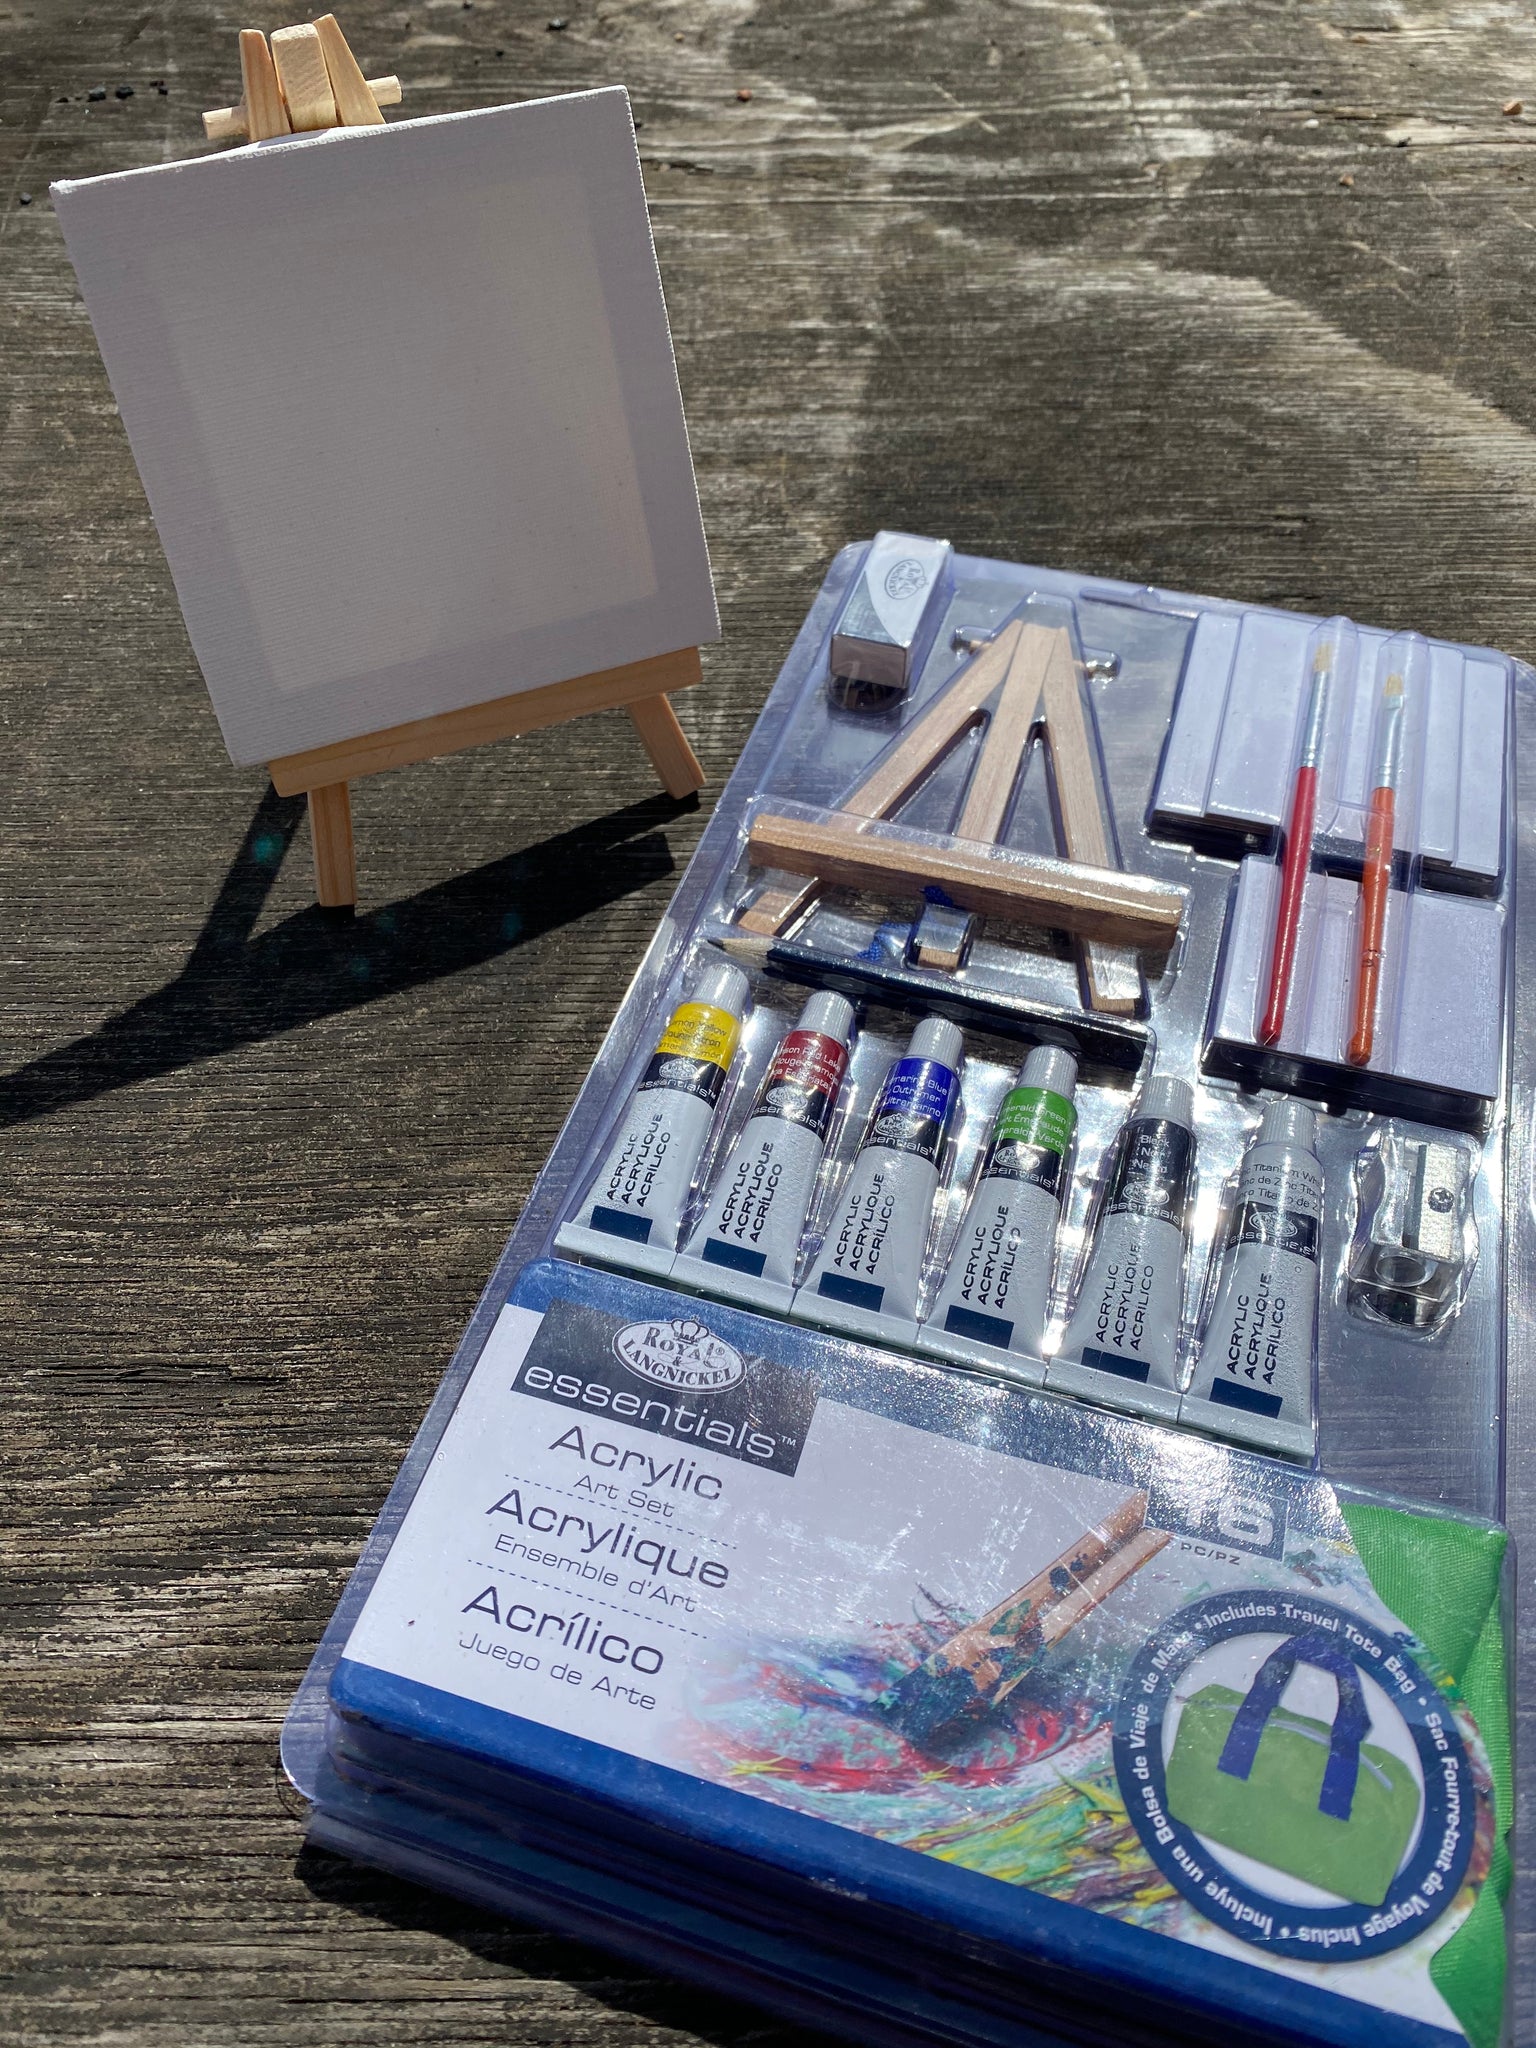 Shop the best PBN Mini Canvas with Easel - Unicorn today